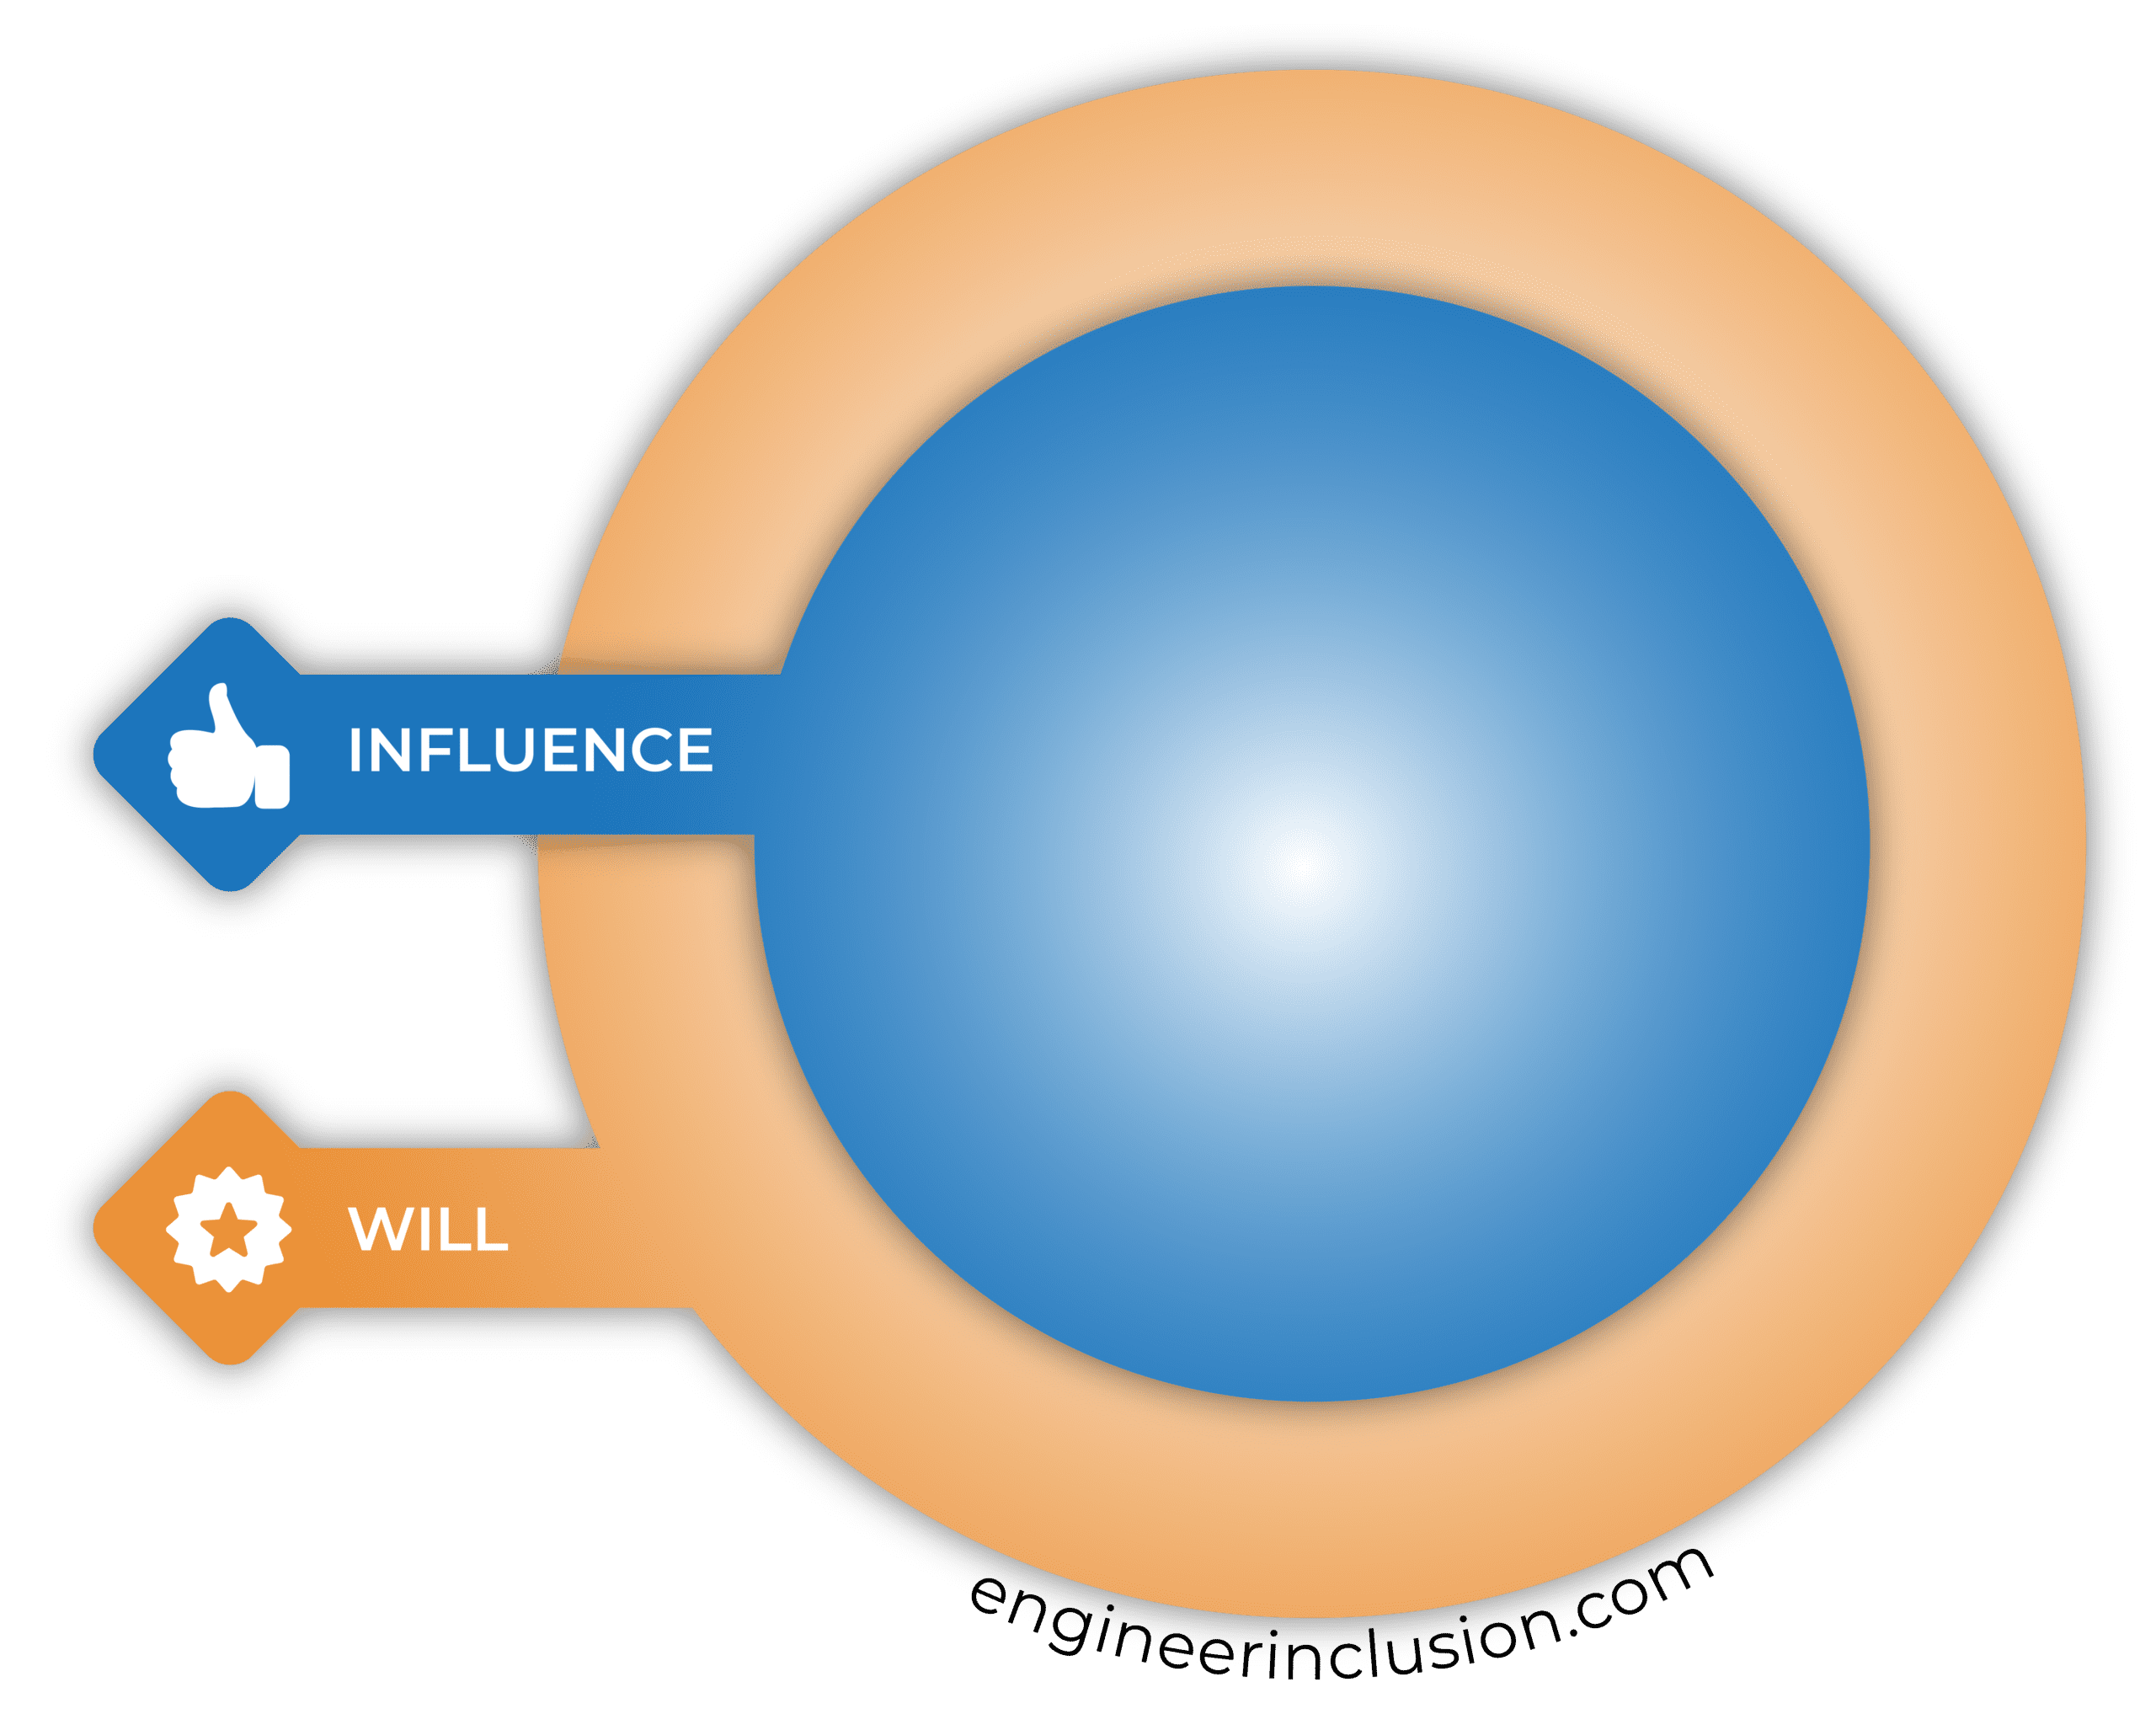 Where does your will intersect your influence?